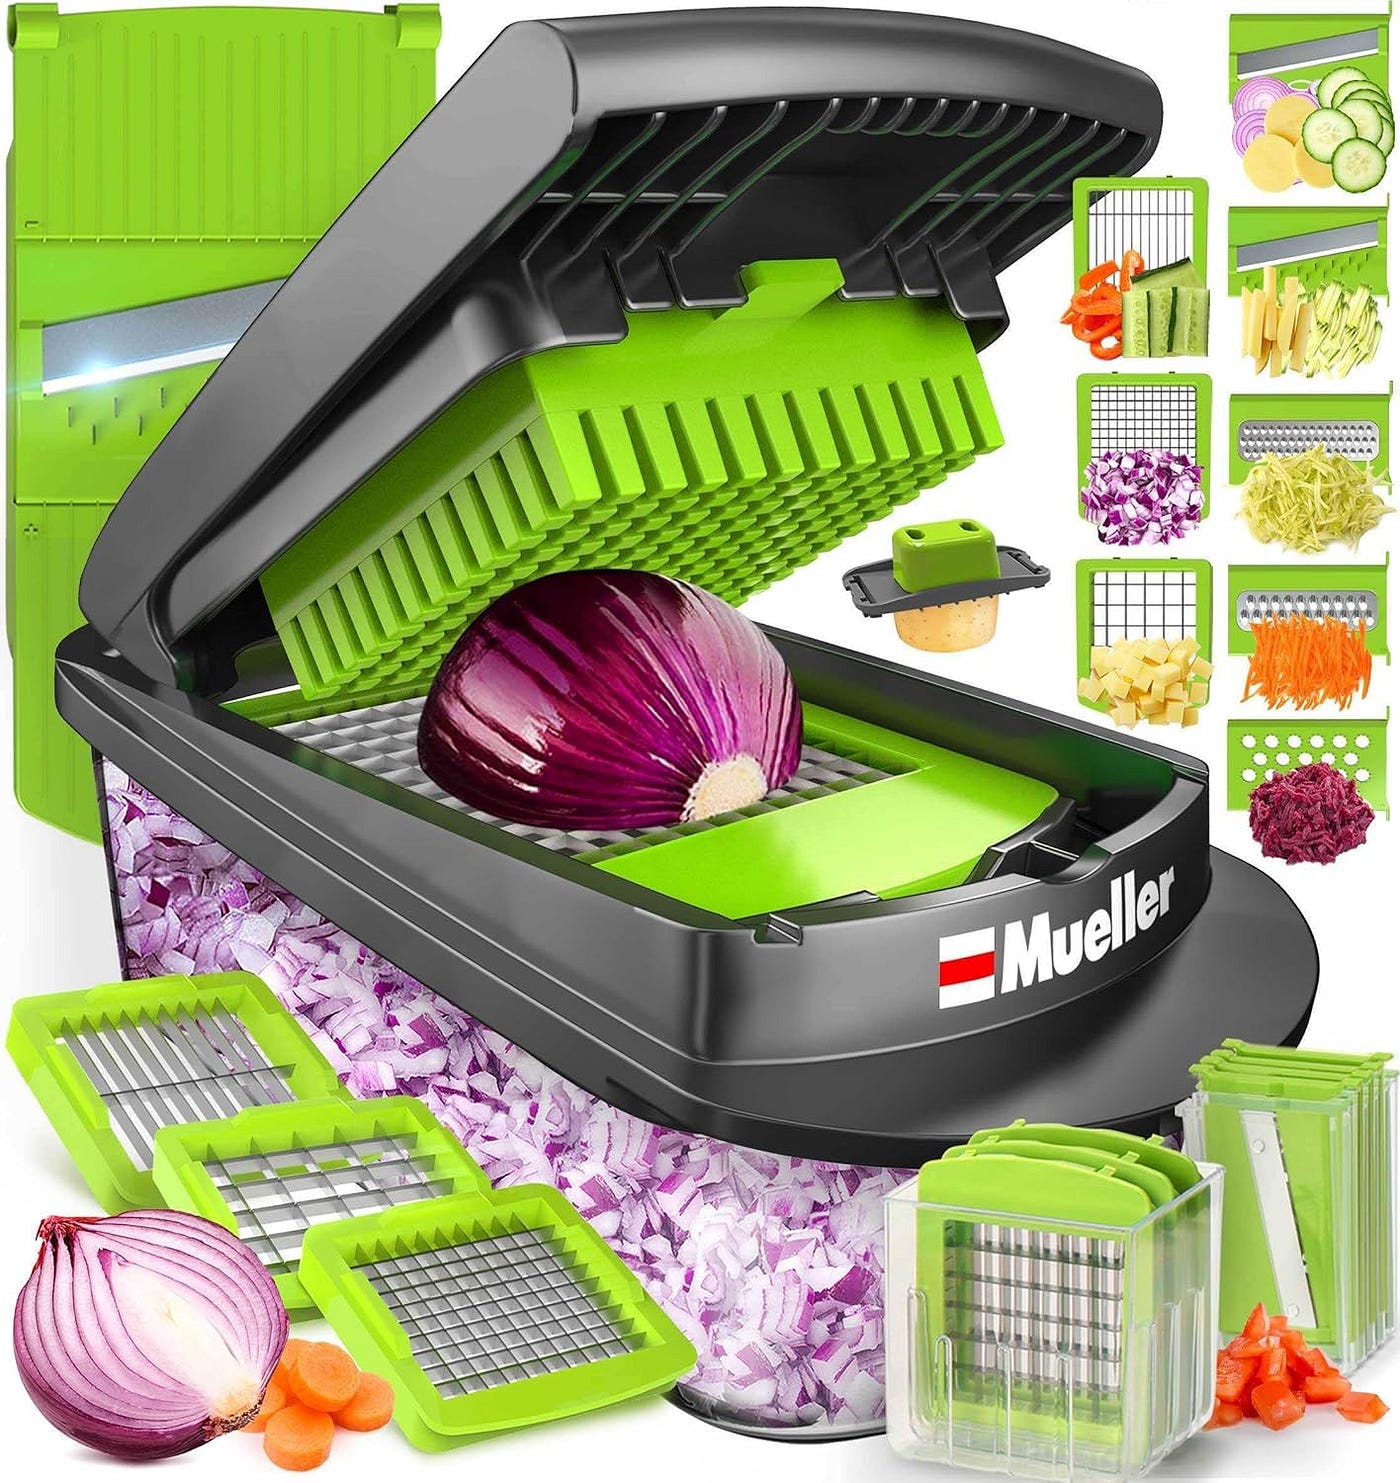 The Best Vegetable Choppers to Buy in 2023